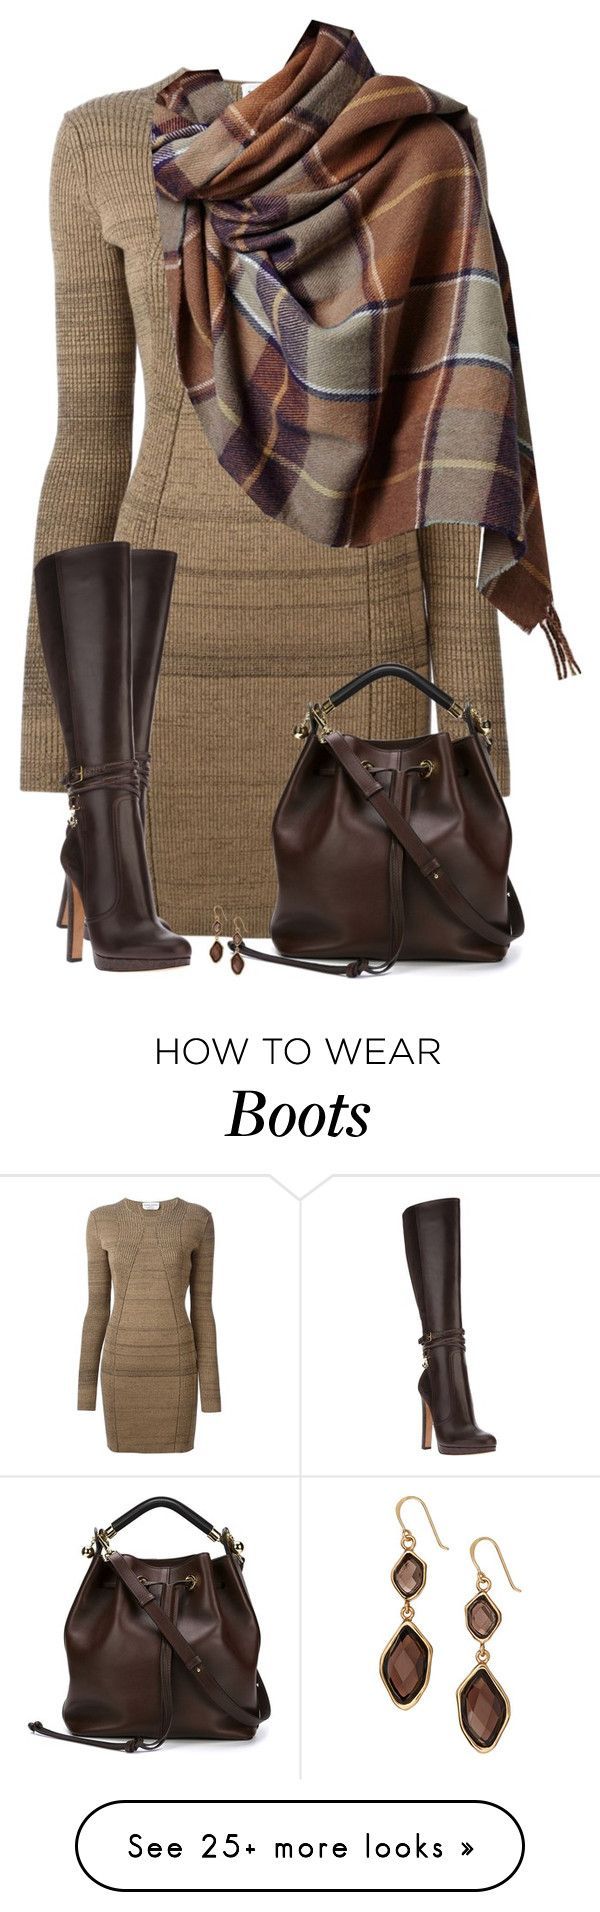 “Sweater Dress & Boots” by daiscat on Polyvore featuring Sonia Rykie